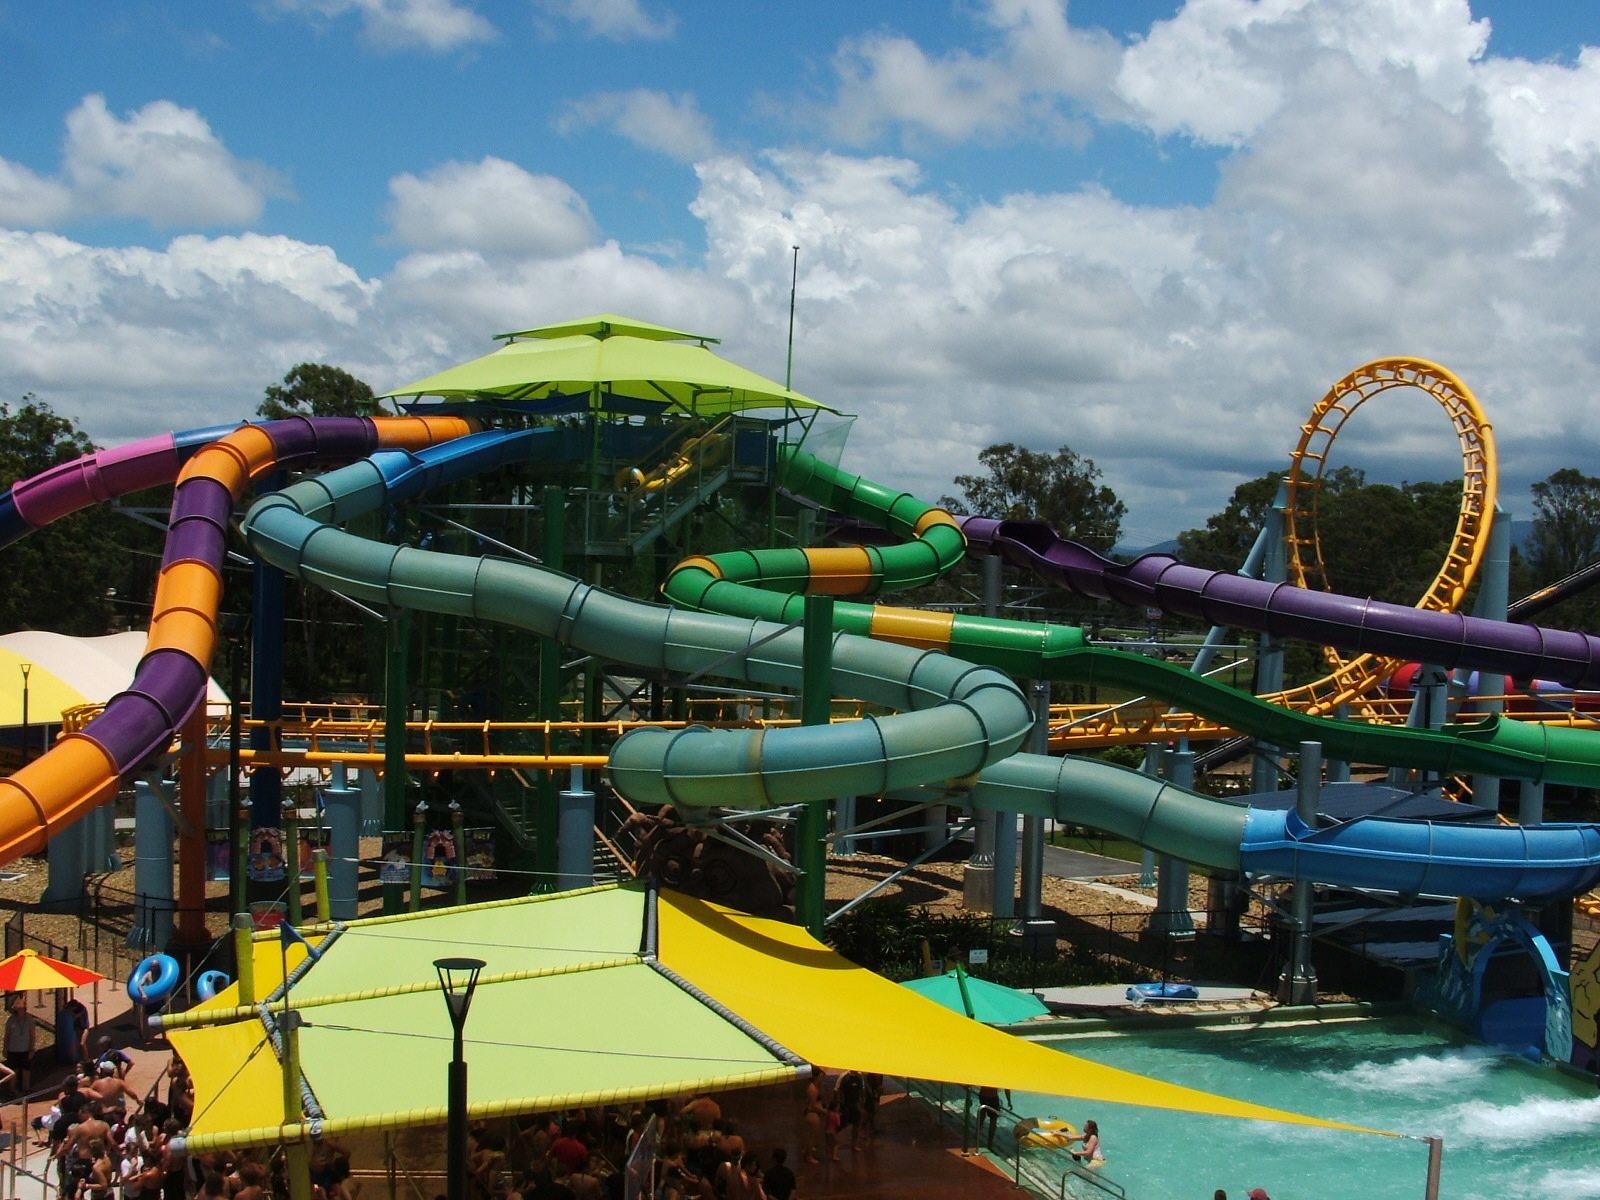 Top 3 Waterparks in the U.S.